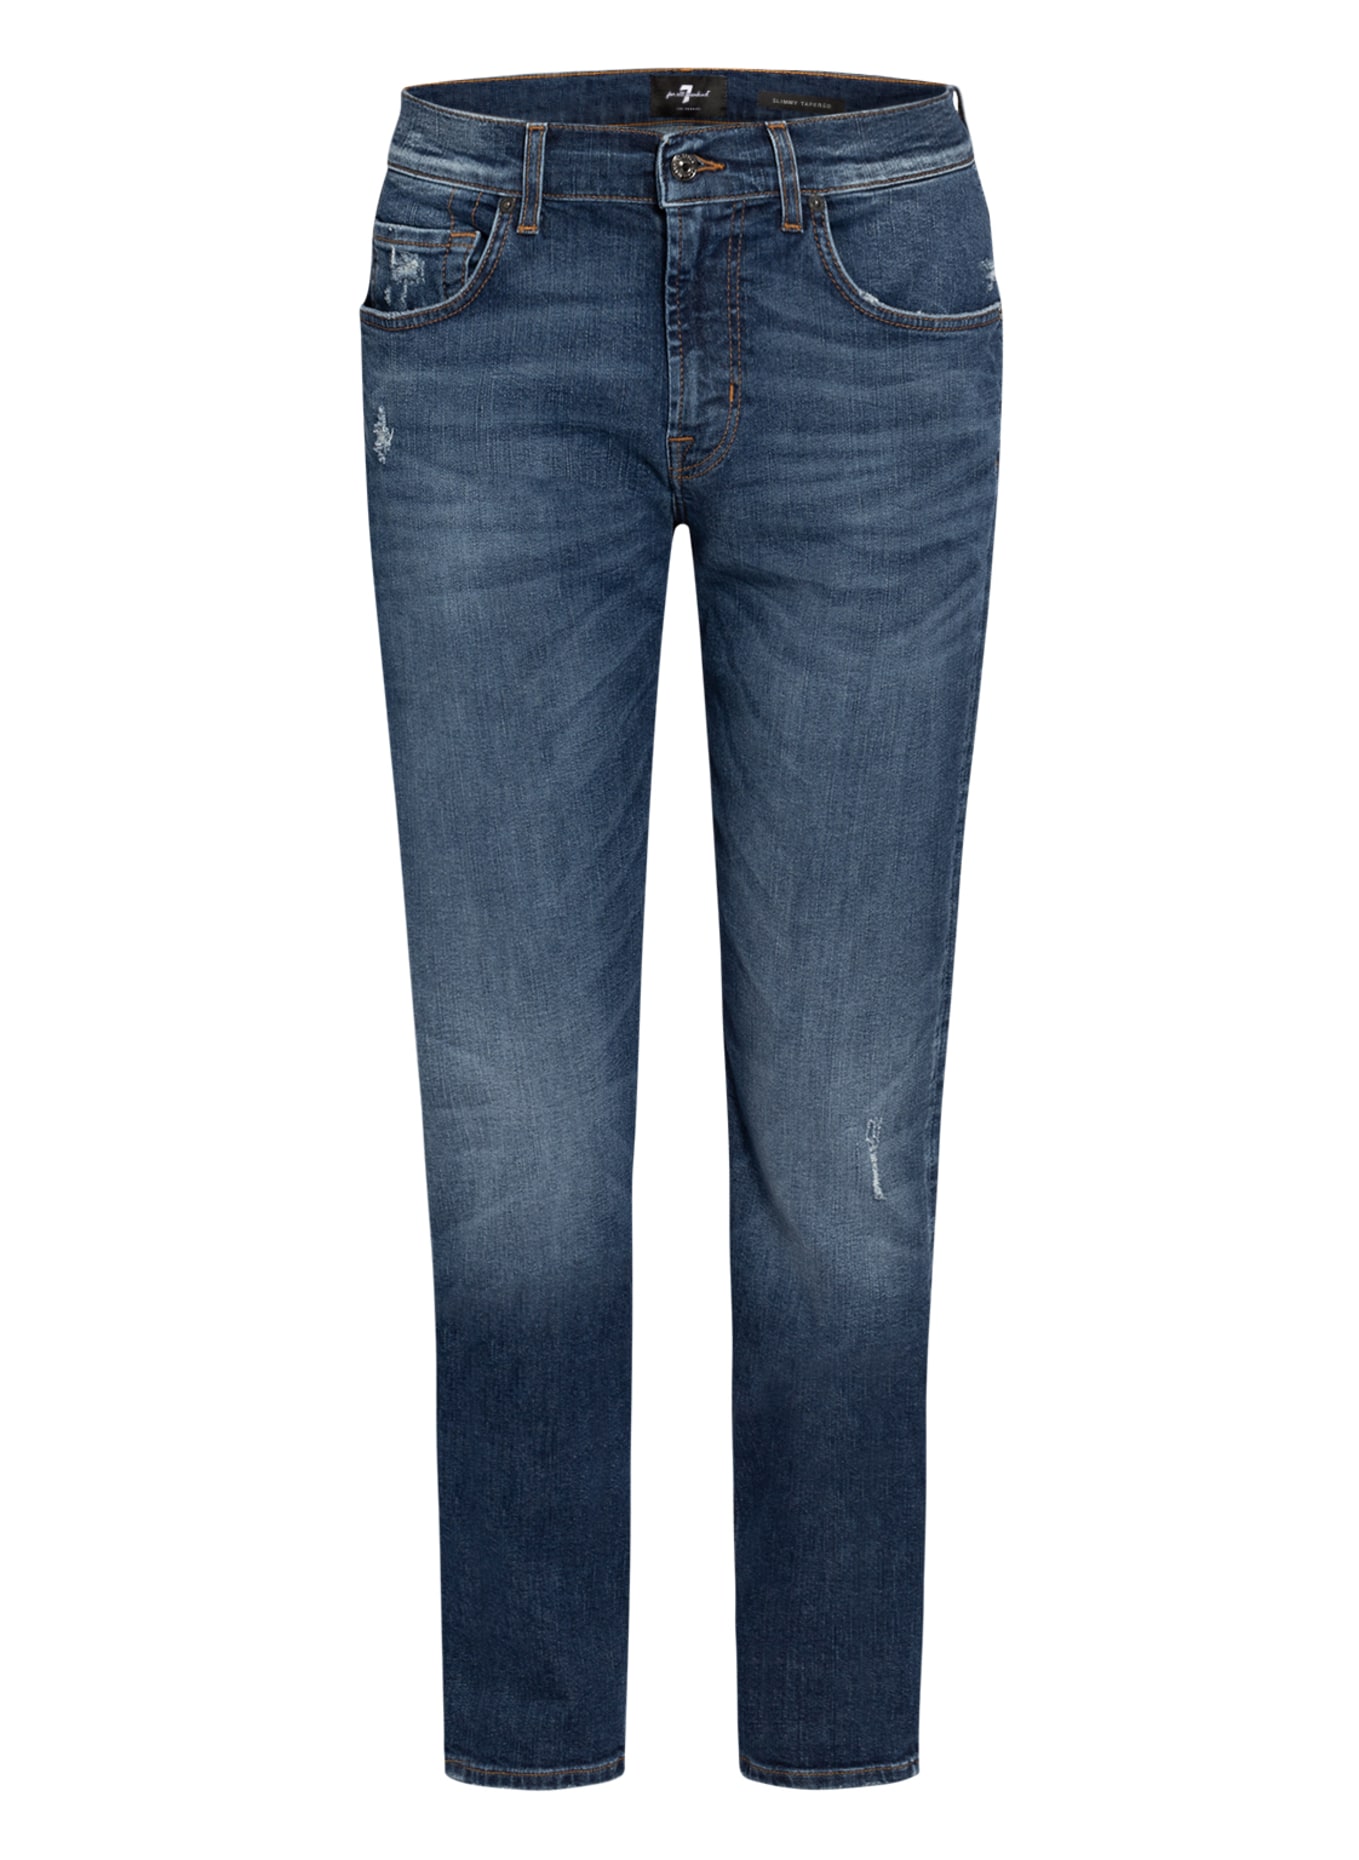 7 for all mankind Destroyed-Jeans SLIMMY Tapered Fit, Farbe: MID BLUE (Bild 1)